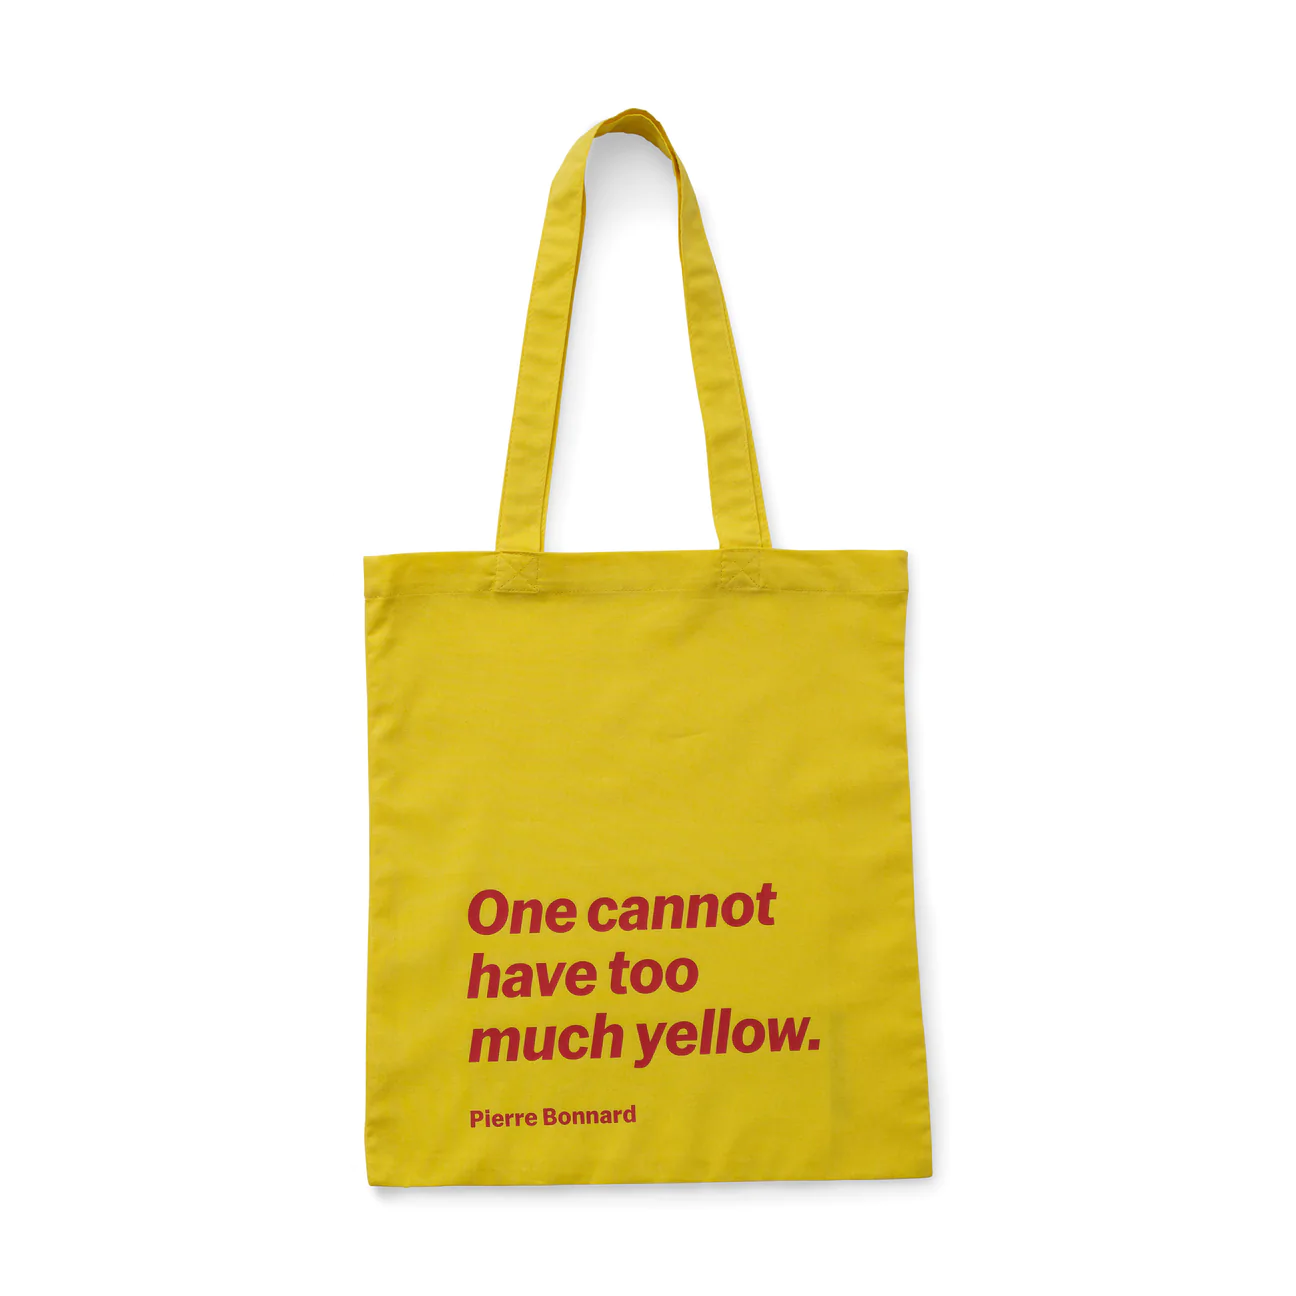 Gifts for Art Teachers: MoMa tote